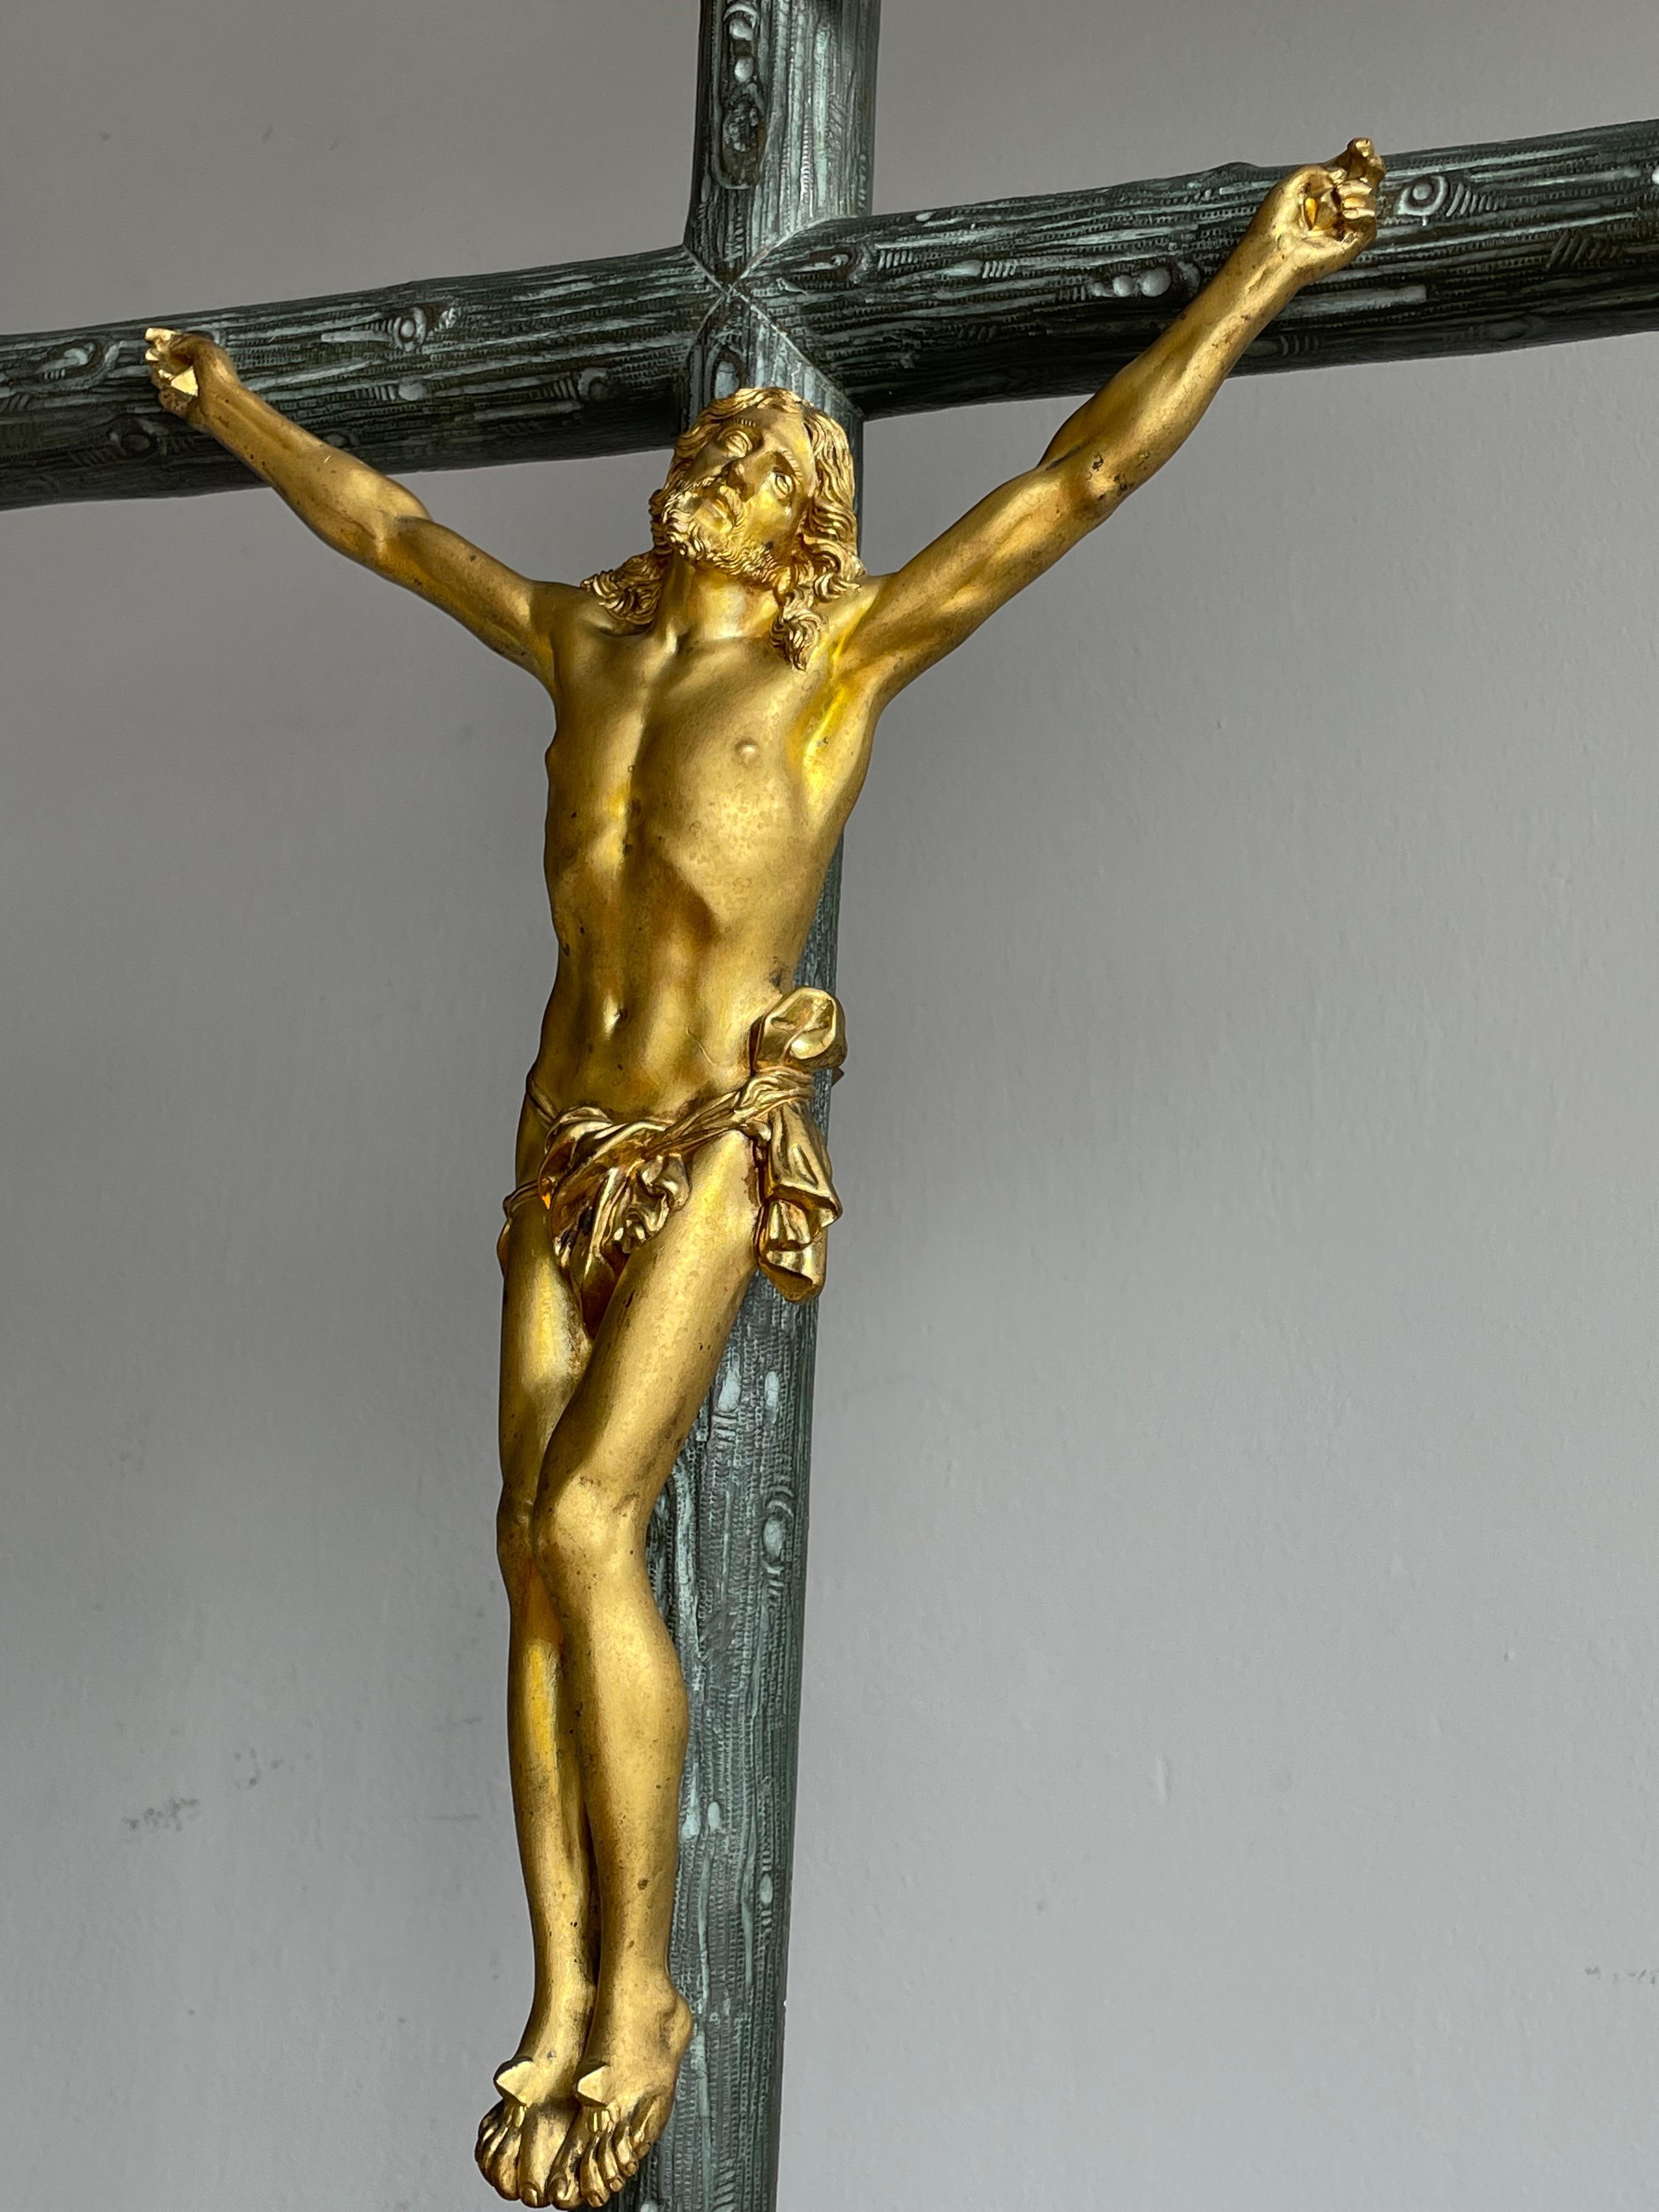 Impressive and amazingly detailed altar crucifix with a snake and an all seeing eye of god sculpture.

Over the years we have been blessed with the opportunity of purchasing many antique church relics and we have always found new homes for them.